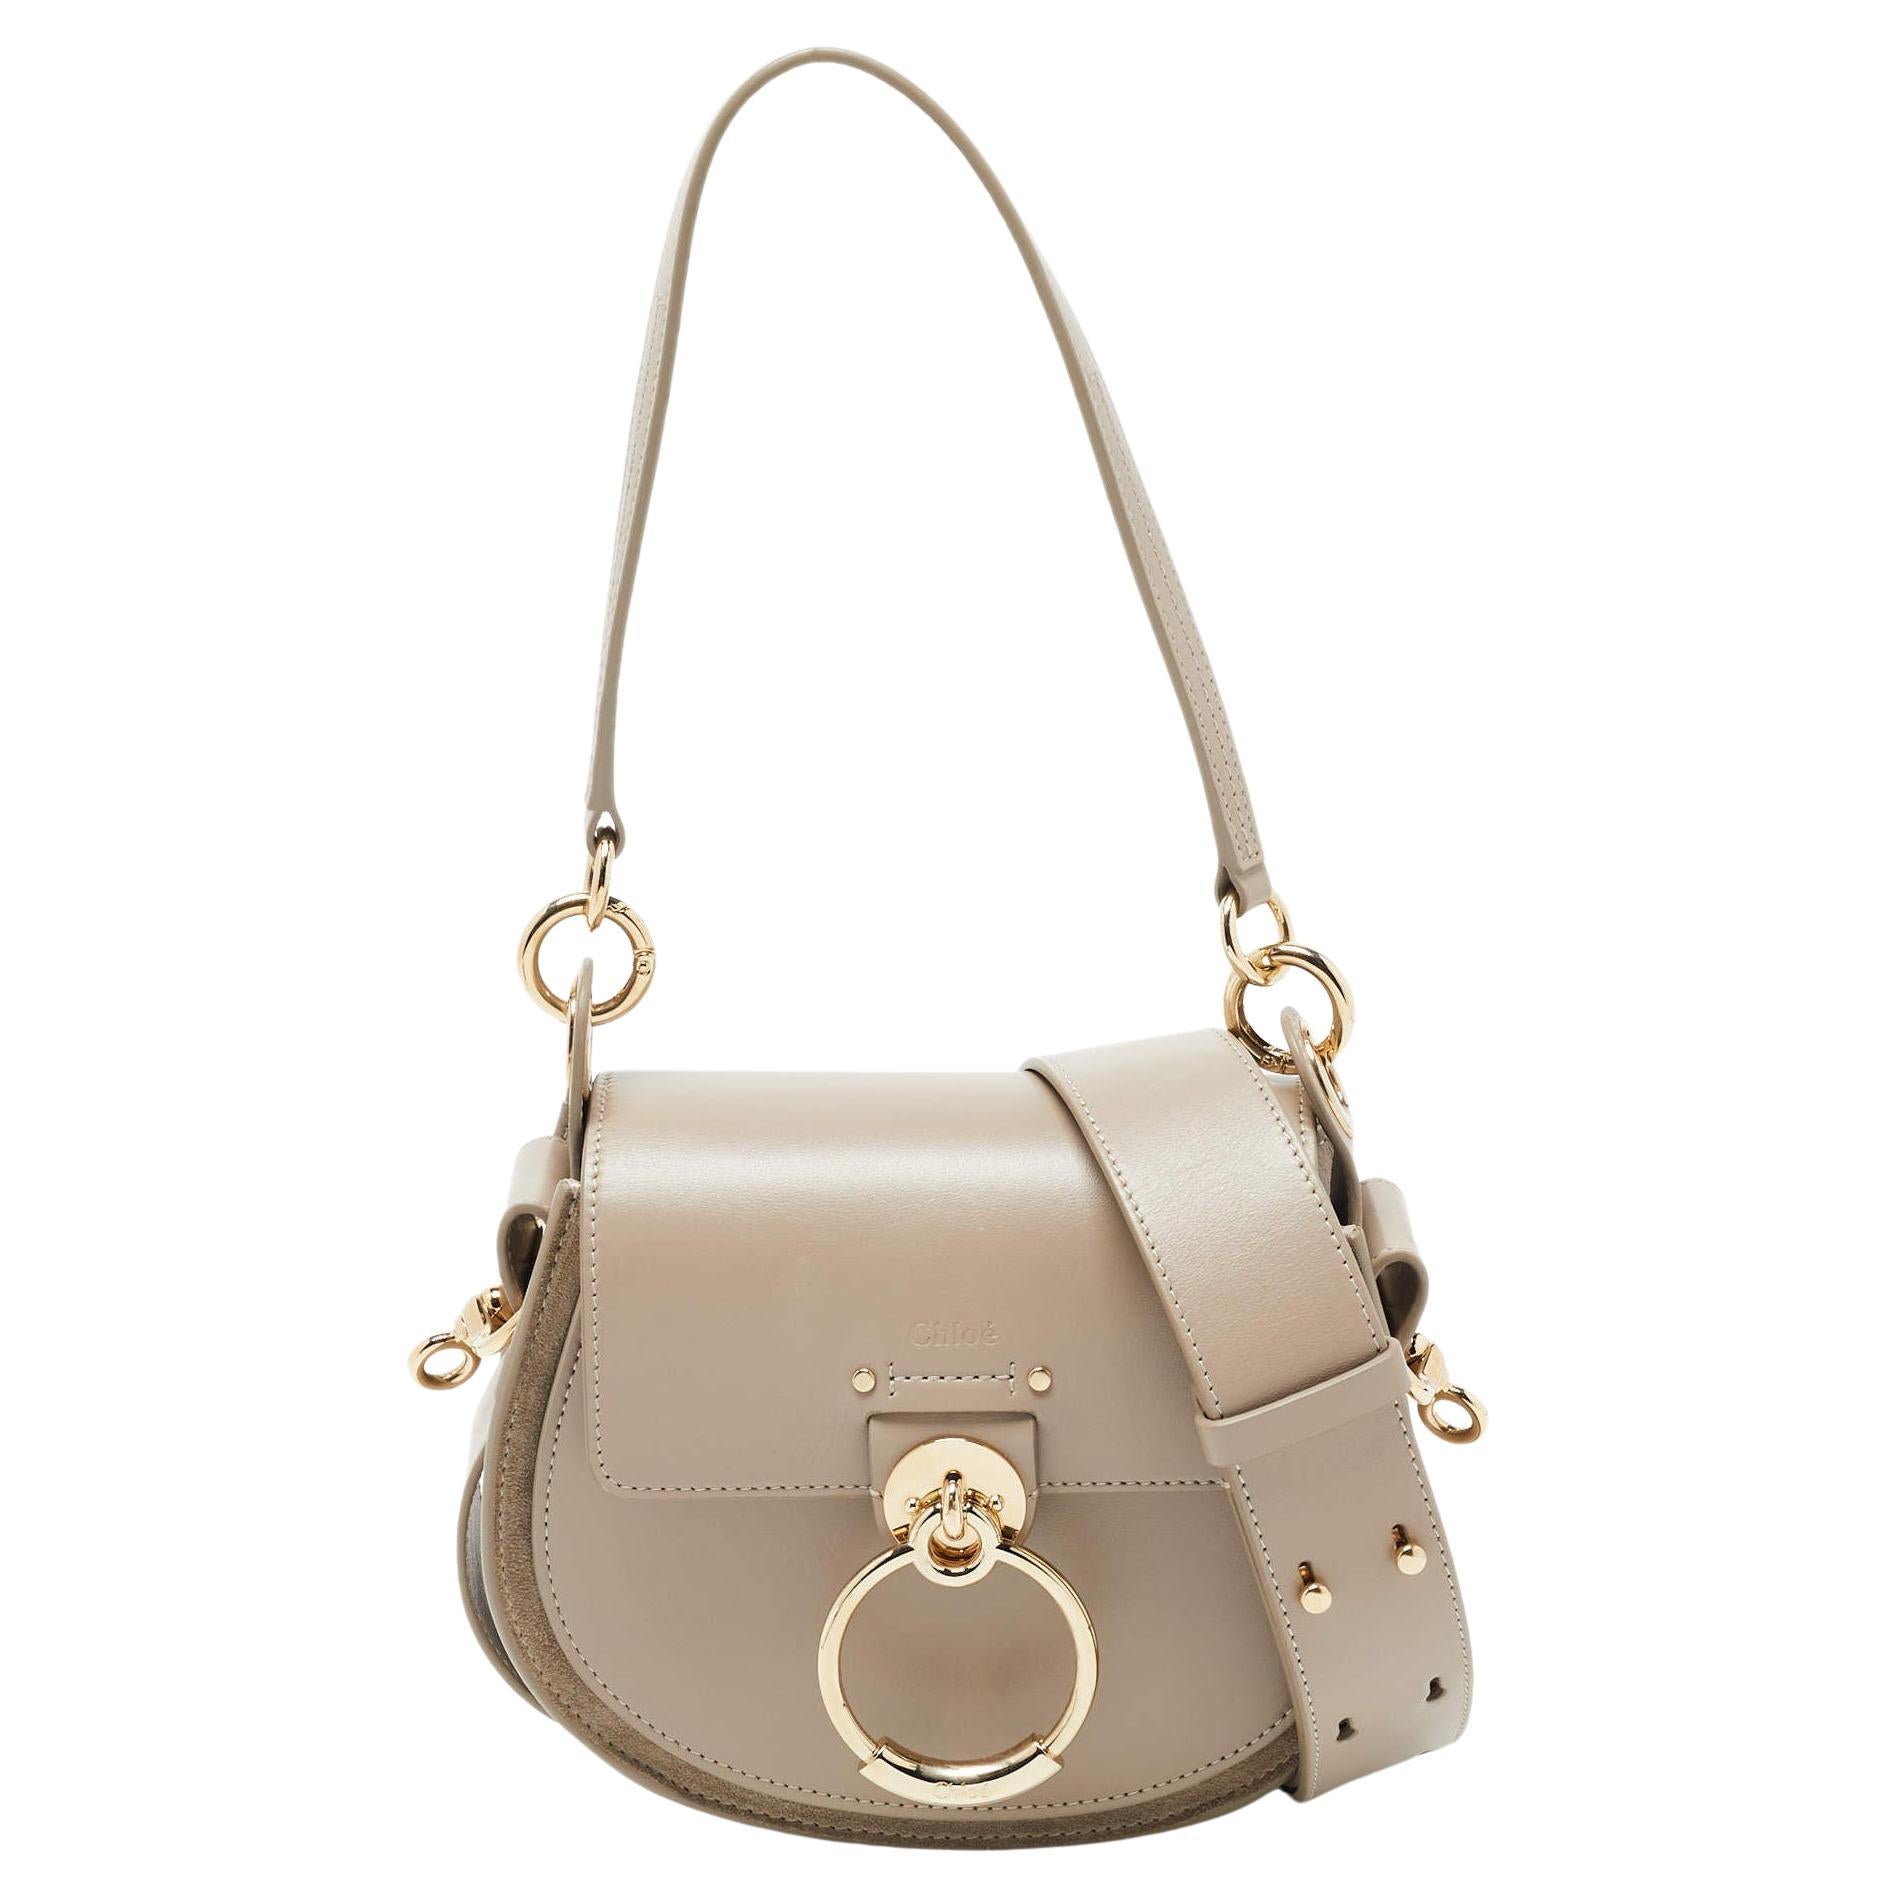 Chloe Grey Leather and Suede Small Tess Shoulder Bag